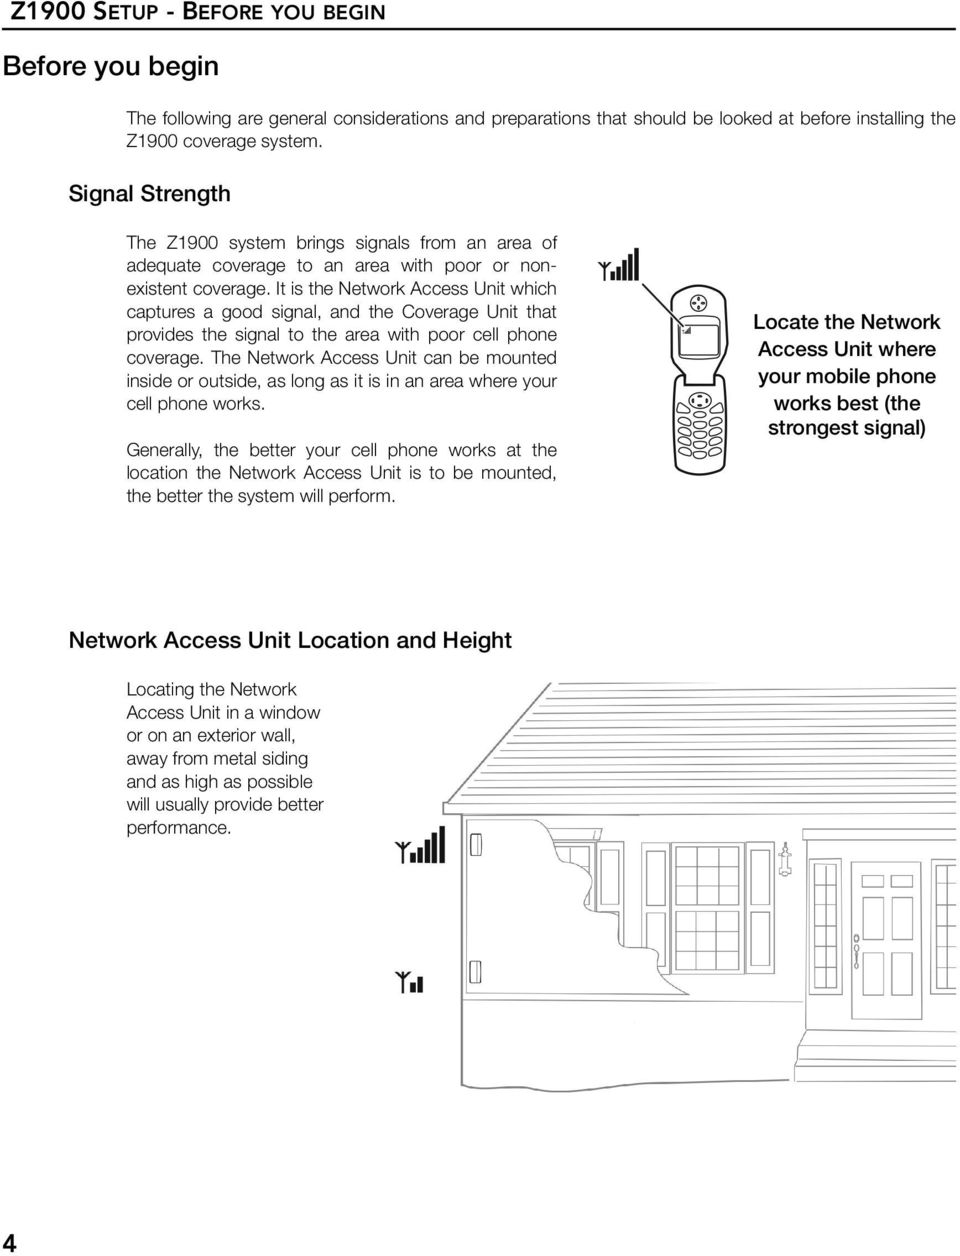 It is the Network Access Unit which captures a good signal, and the Coverage Unit that provides the signal to the area with poor cell phone coverage.